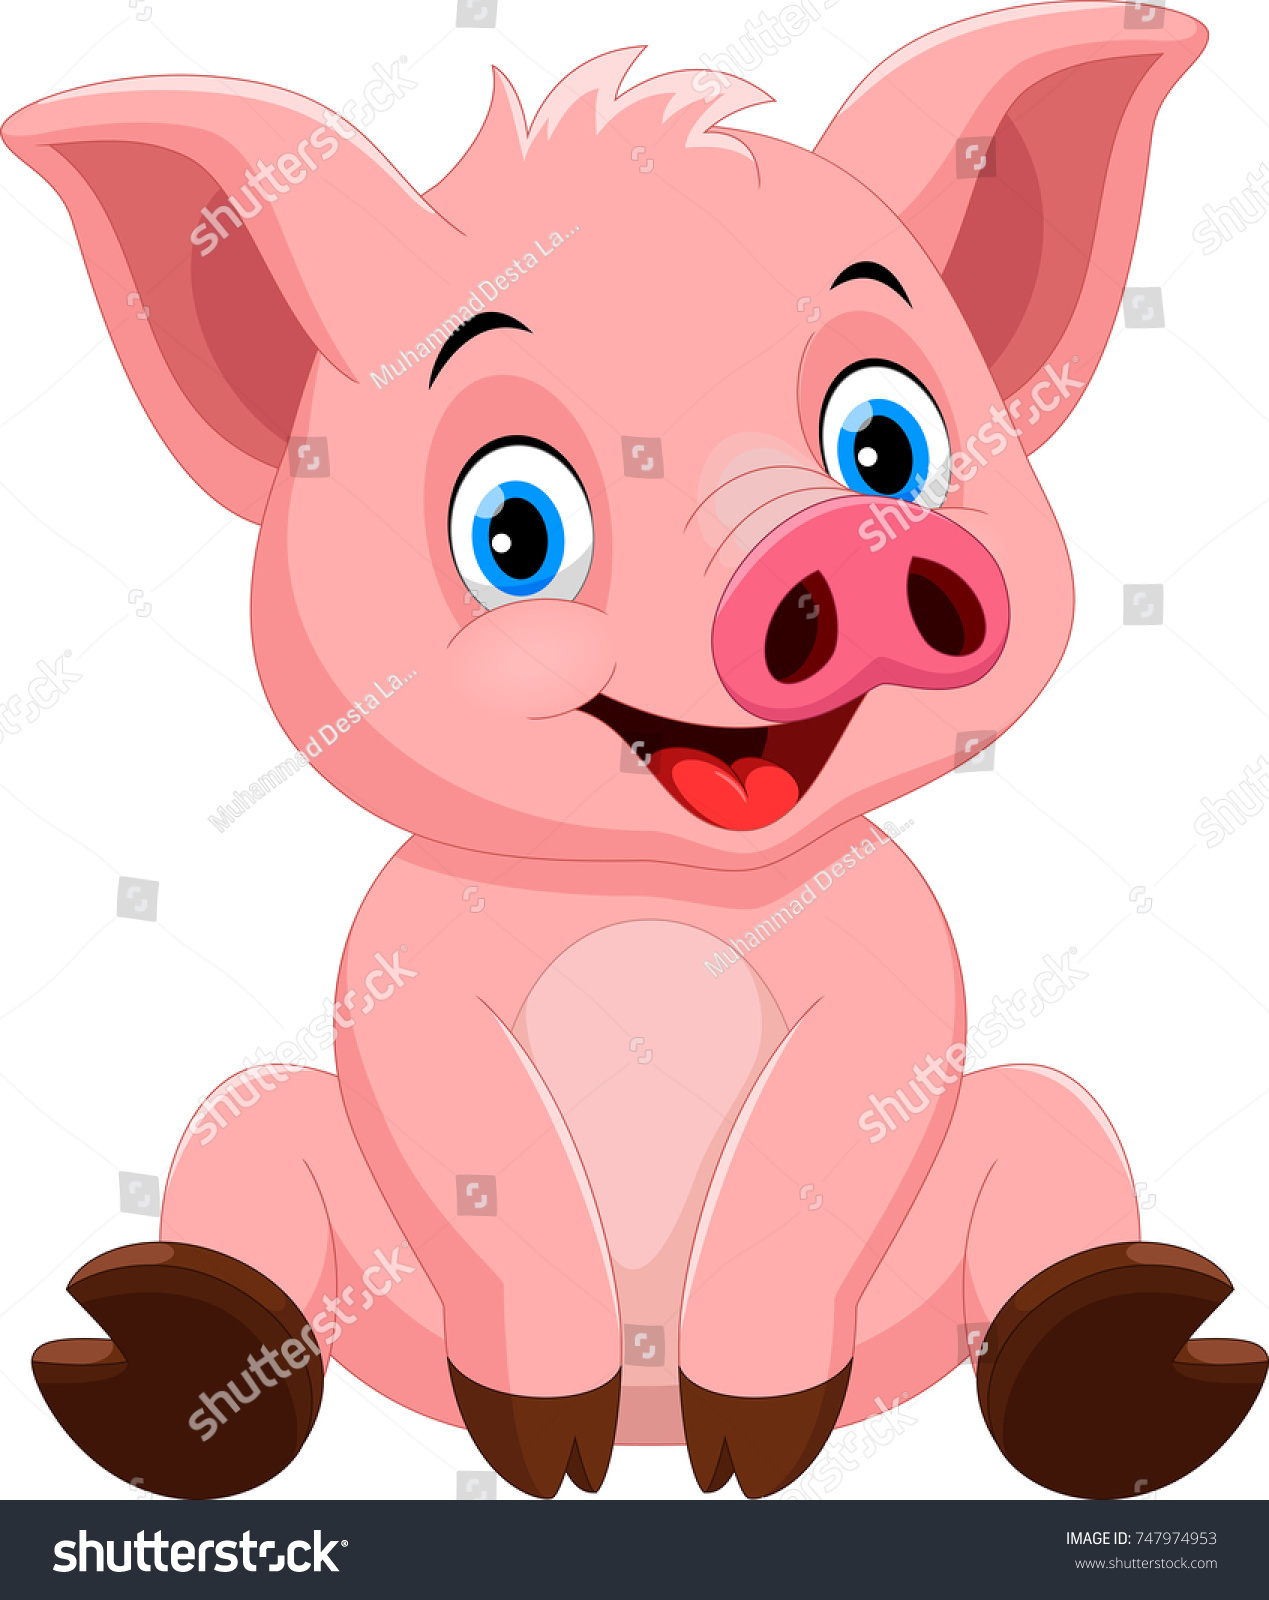 Featured image of post Cute Cartoon Pig Sitting Cartoon happy pig cartoon isolated on white backgr vector image on vectorstock